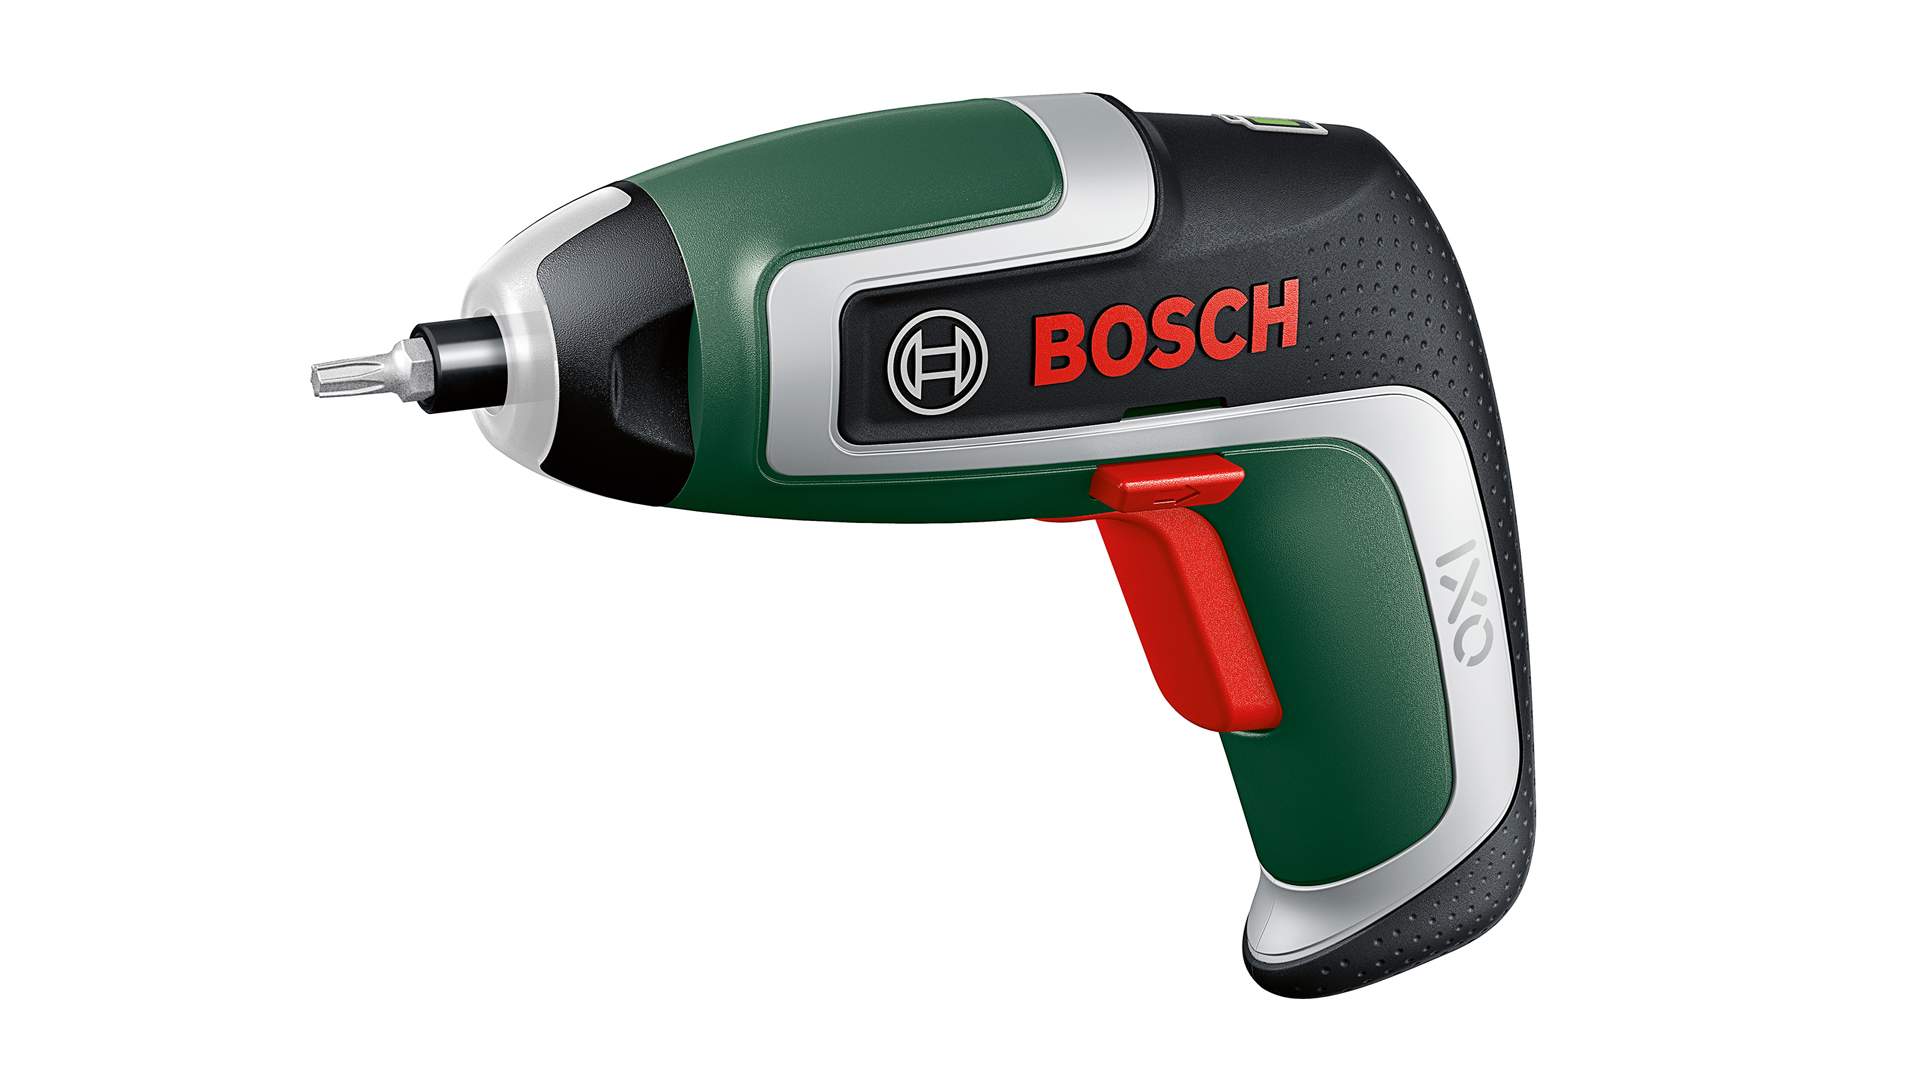 Seventh-generation Ixo: Cult screwdriver from Bosch more powerful than ever before